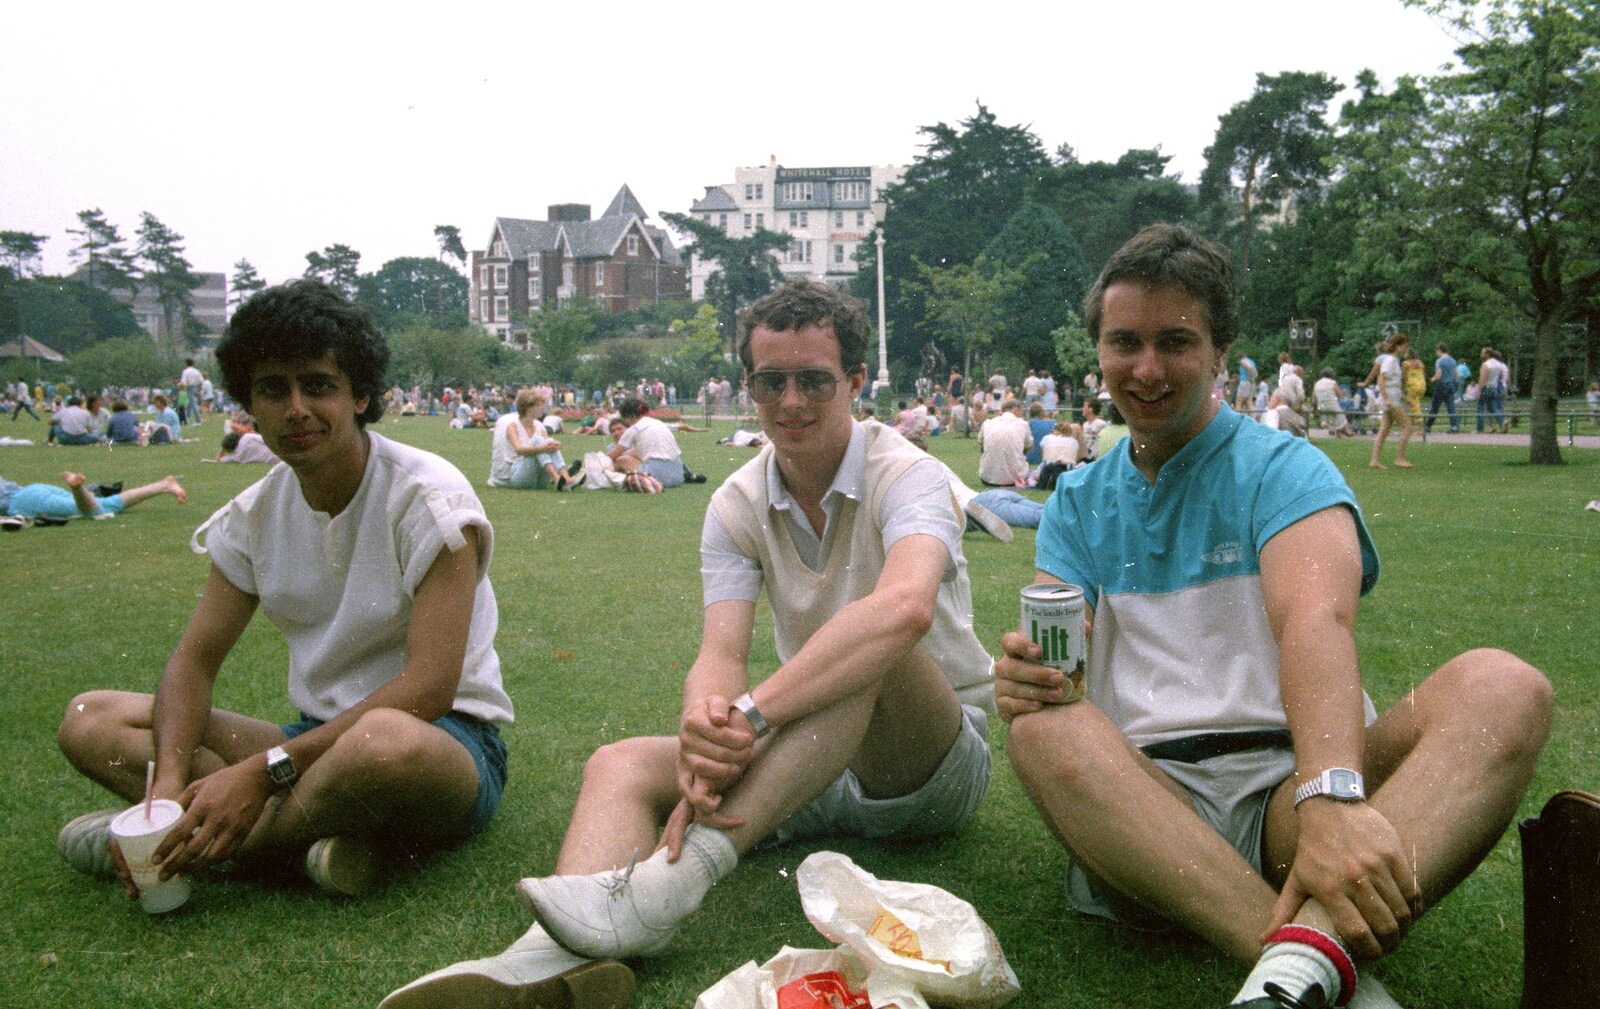 Chris and Riki with a can of Lilt in Lower Gardens from A CB Wedding and a Derelict Railway, Hampshire - 20th July 1986